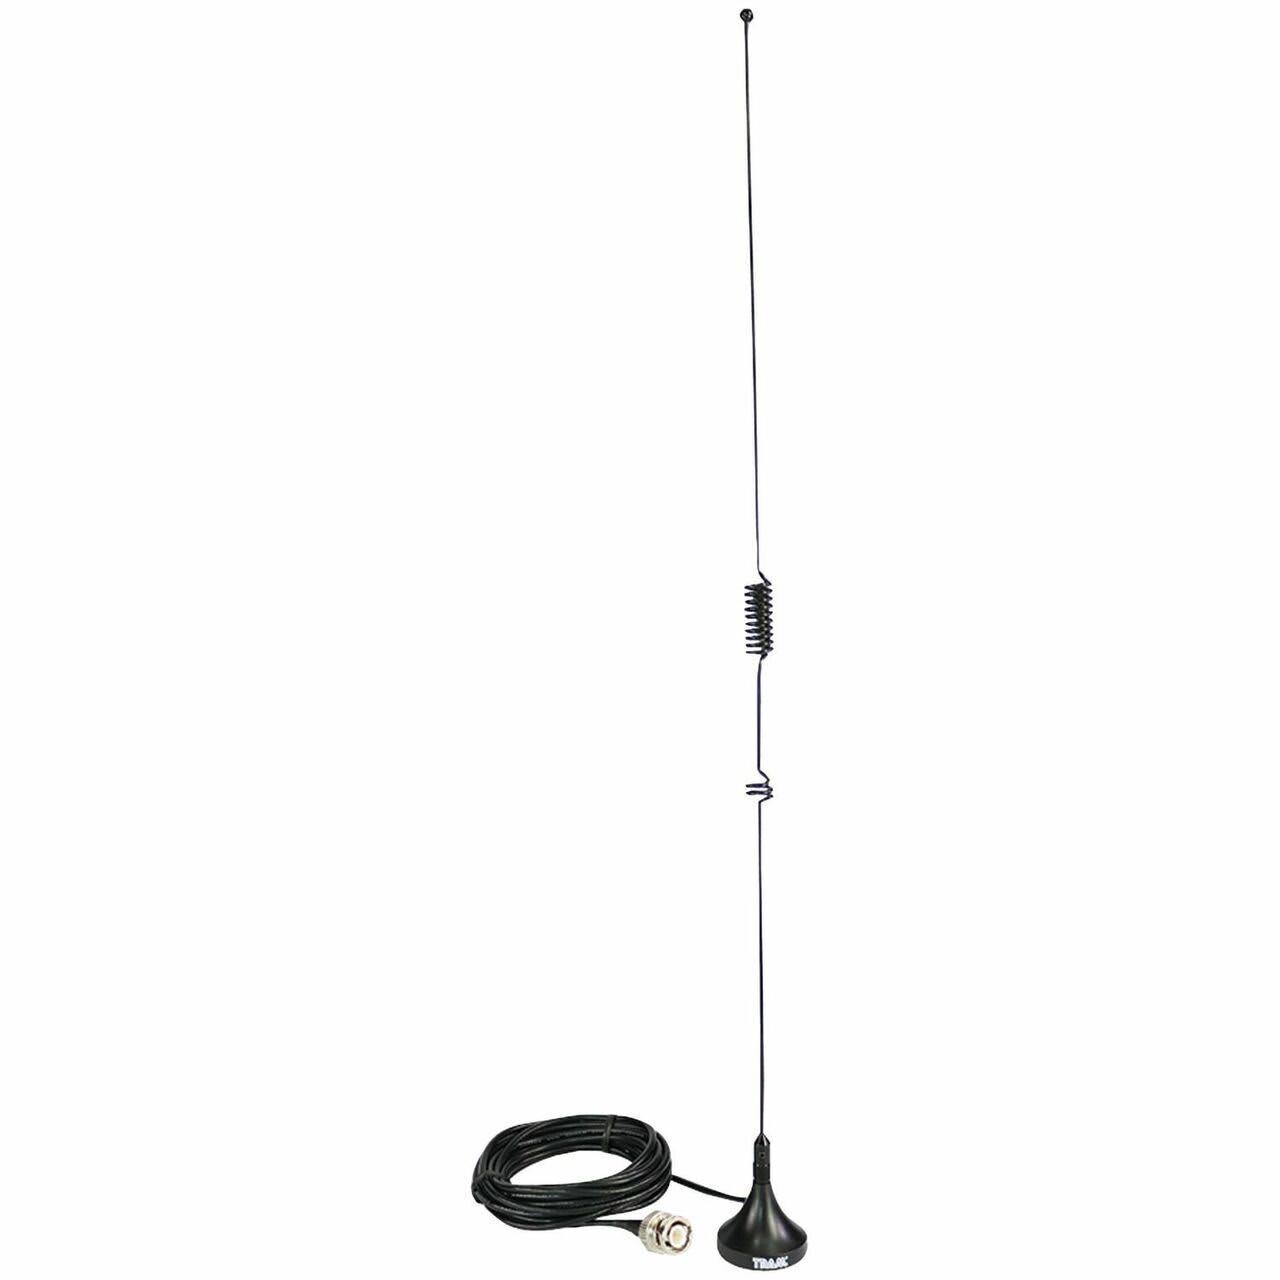 Tram 1089-BNC - Scanner Mini-Magnet Antenna Vhf/uhf/800mhz-1,300mhz with BNC-Male Connector